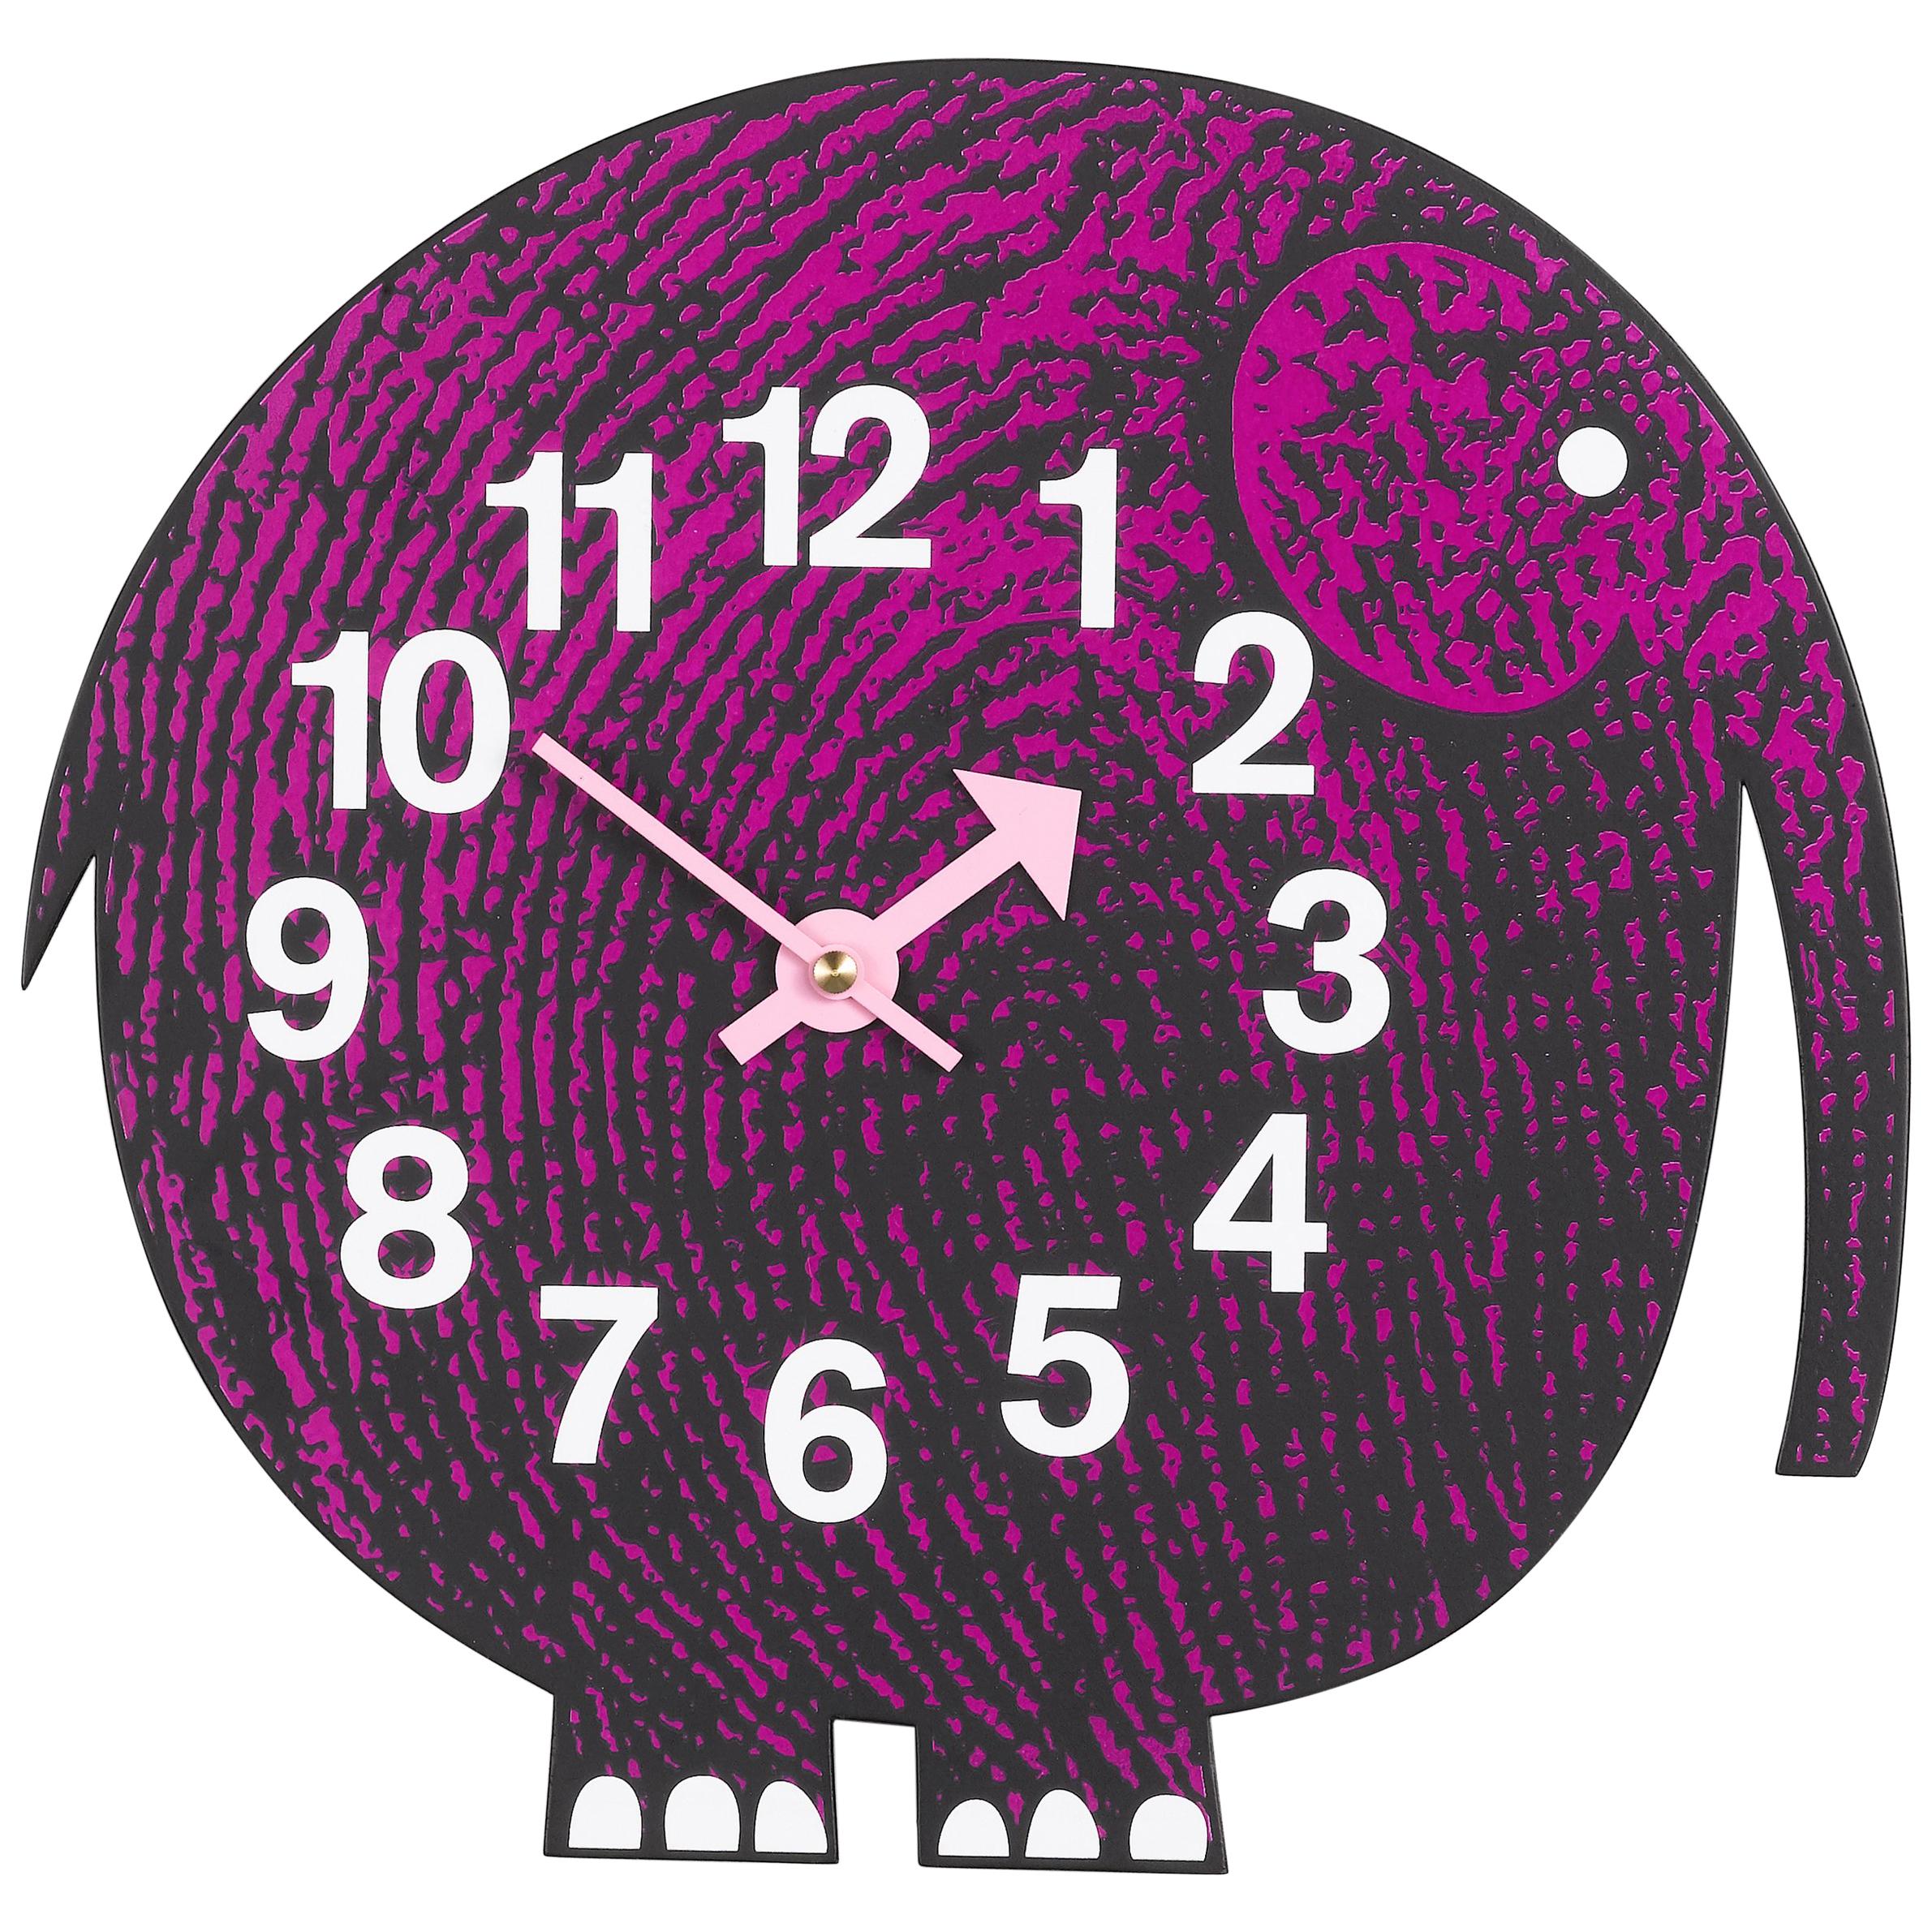 Vitra Zoo Timers Elihu the Elephant Wall Clock in Pink & Black by George Nelson For Sale